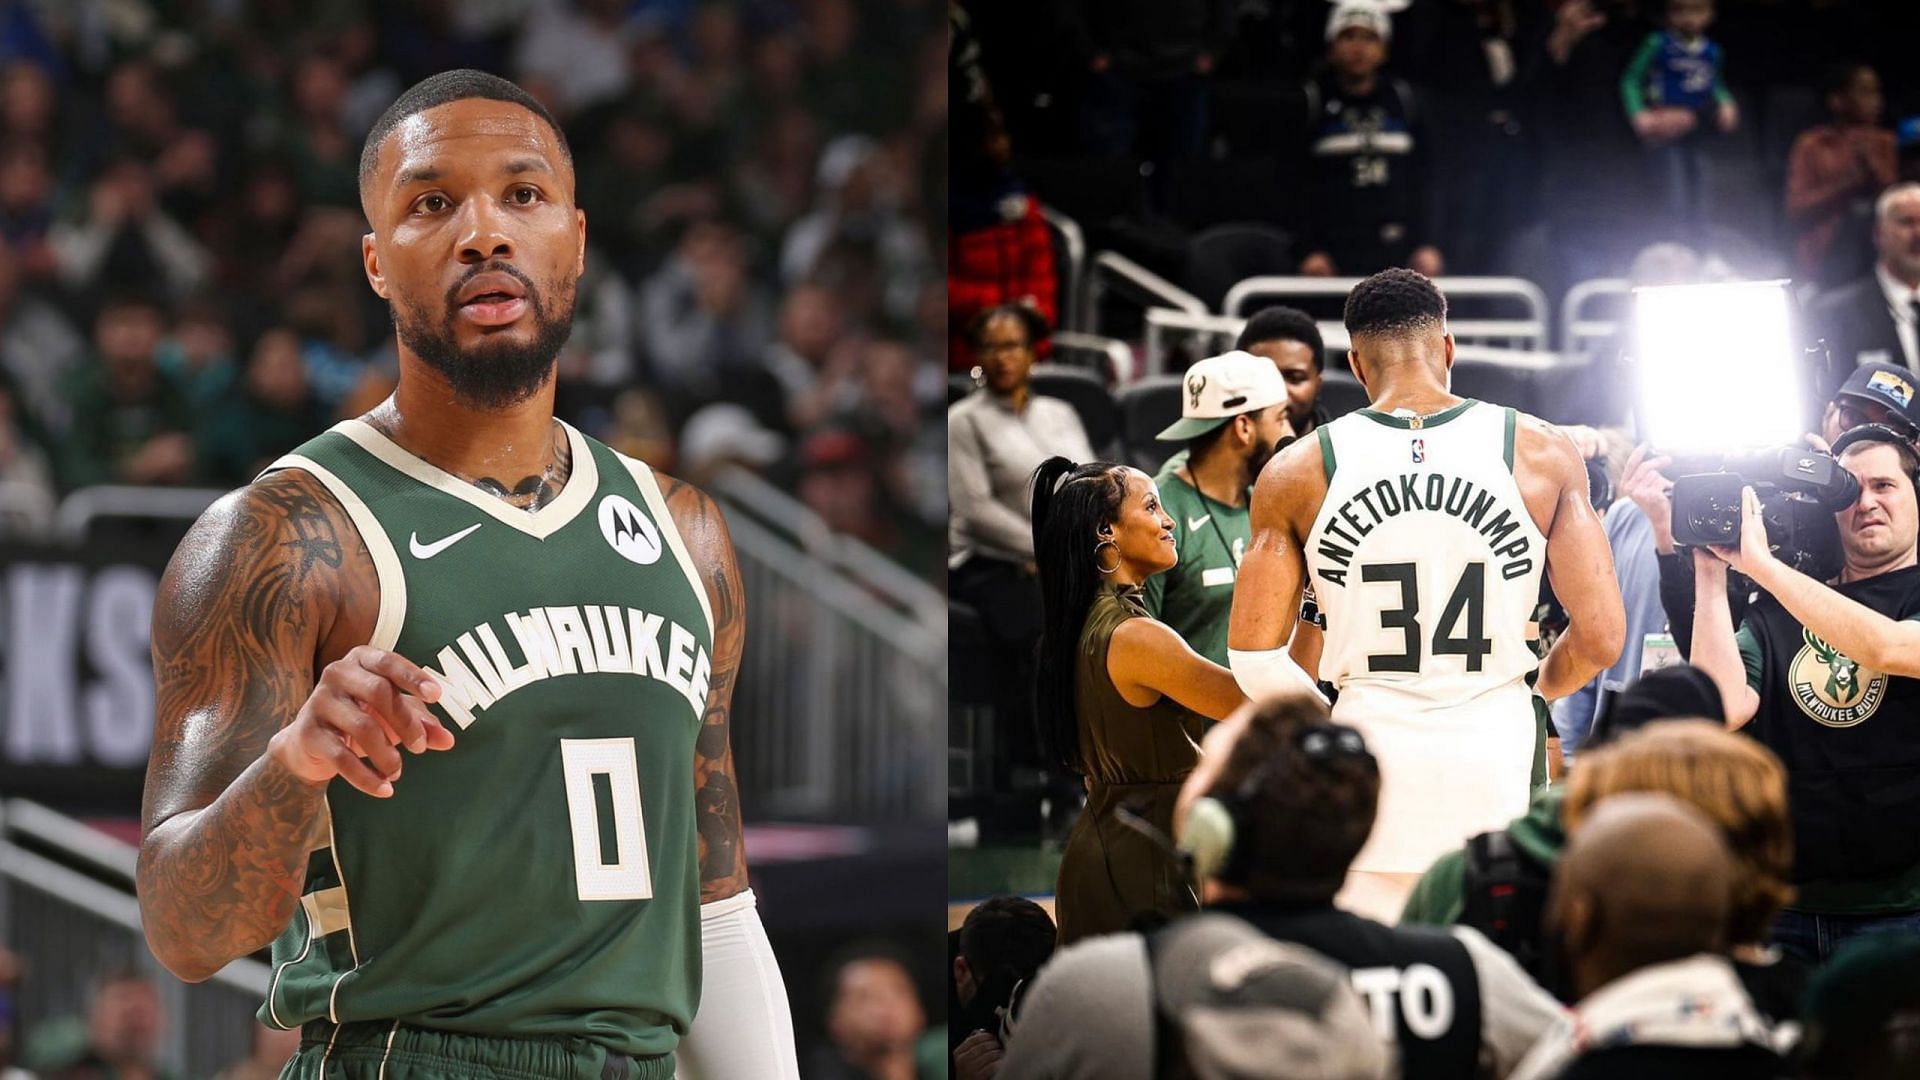 &quot;Best duo in the league&quot;: Bucks fans erupt as Giannis Antetokounmpo &amp; Damian Lillard duo shines with 66 points in Bucks